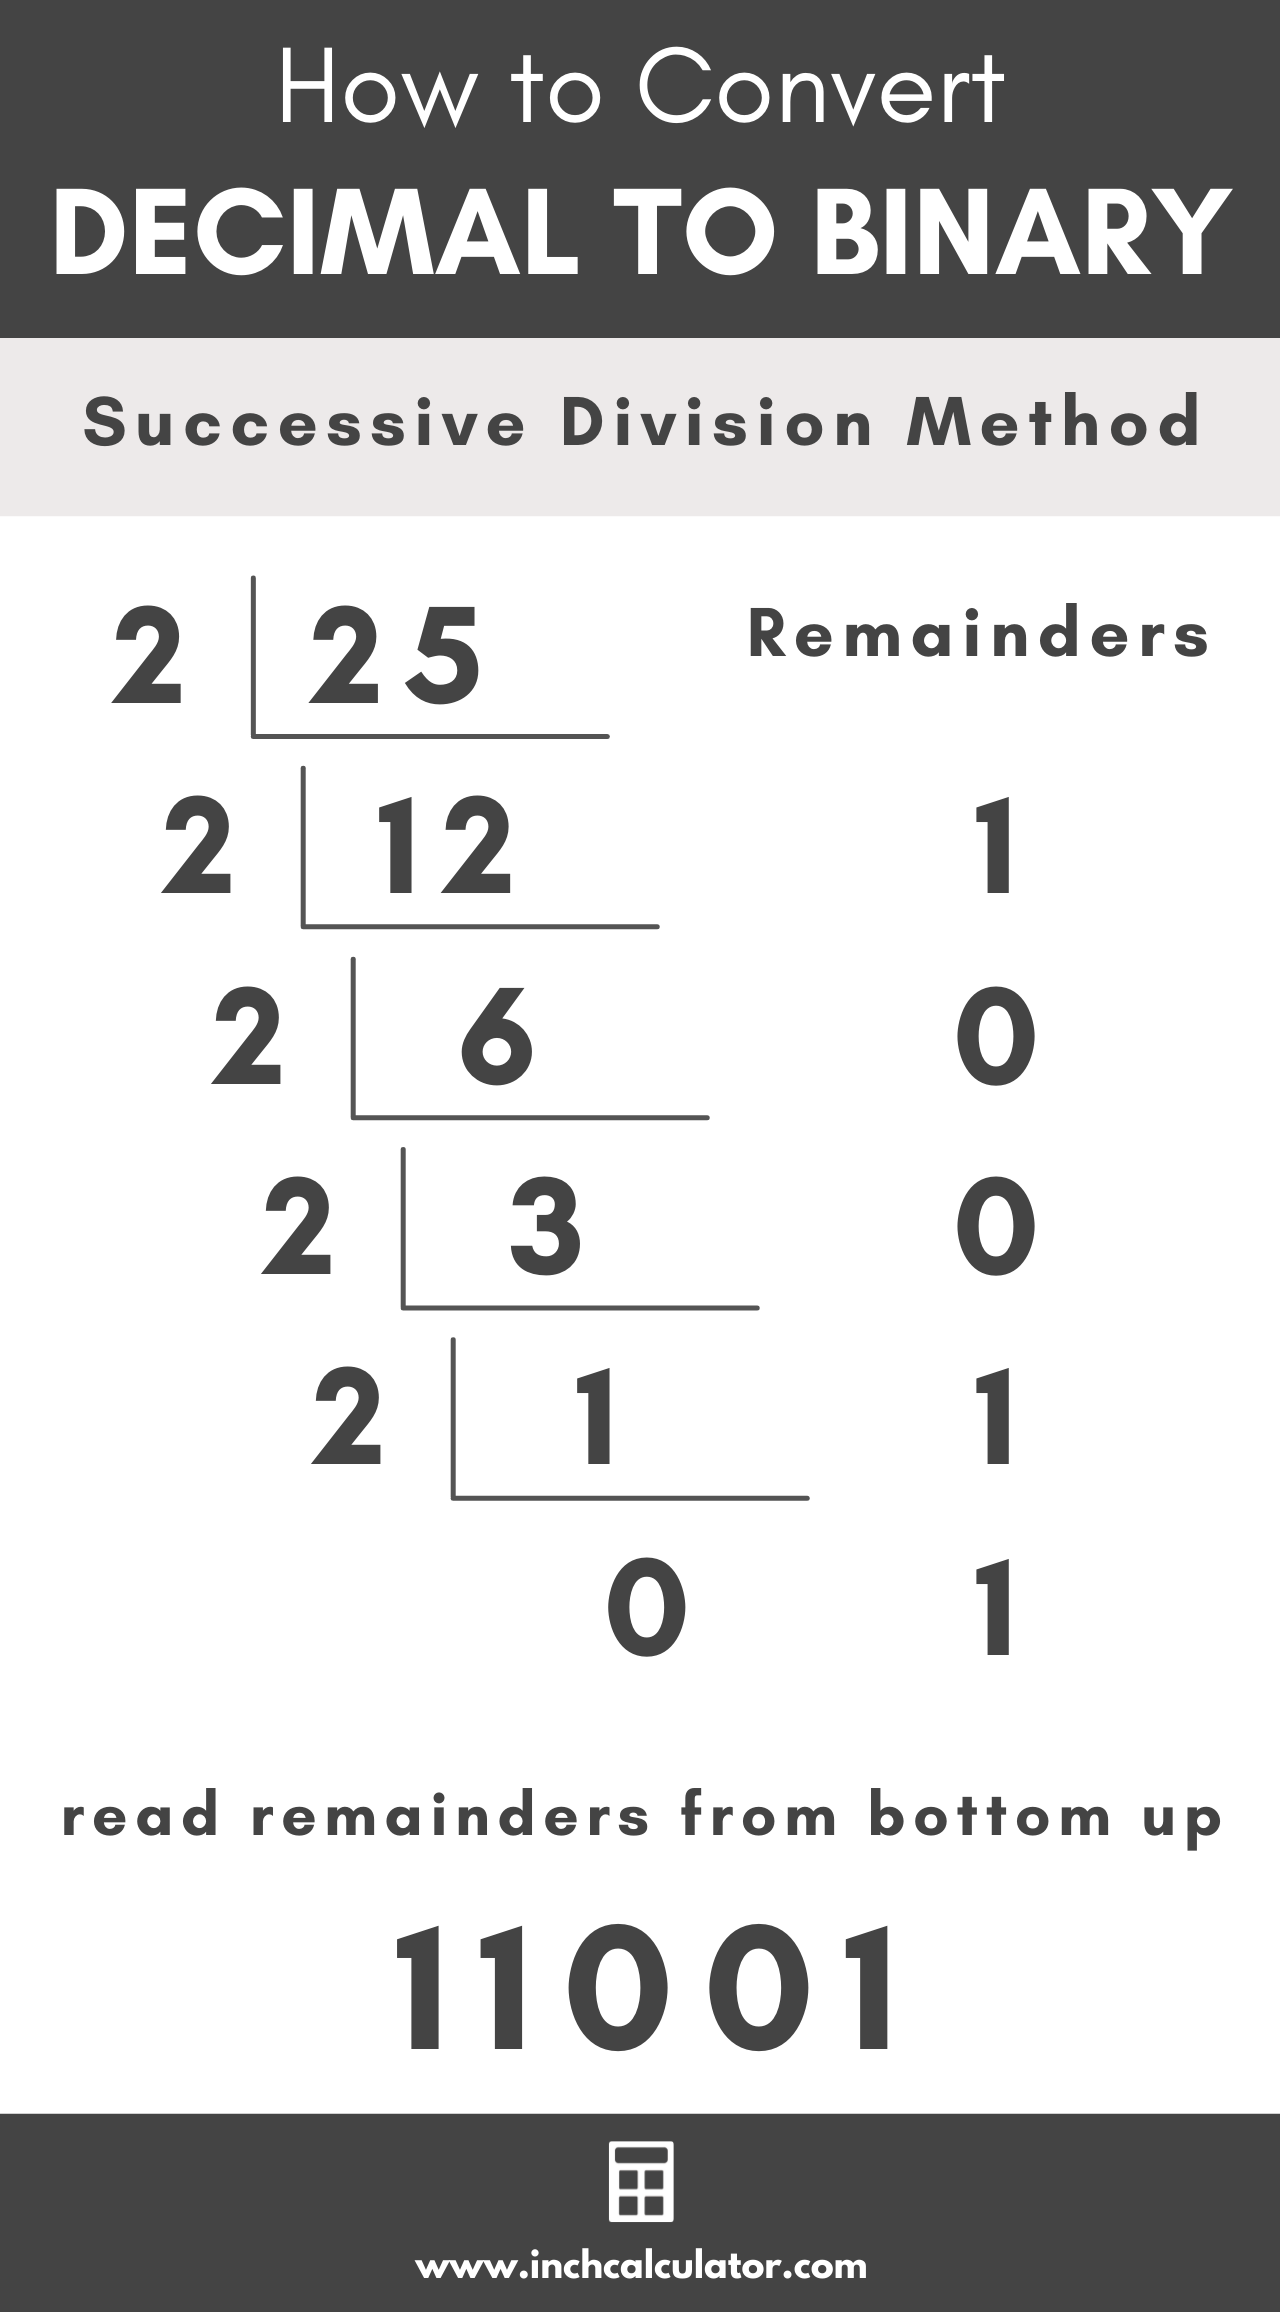 graphic showing how to convert a decimal number to binary